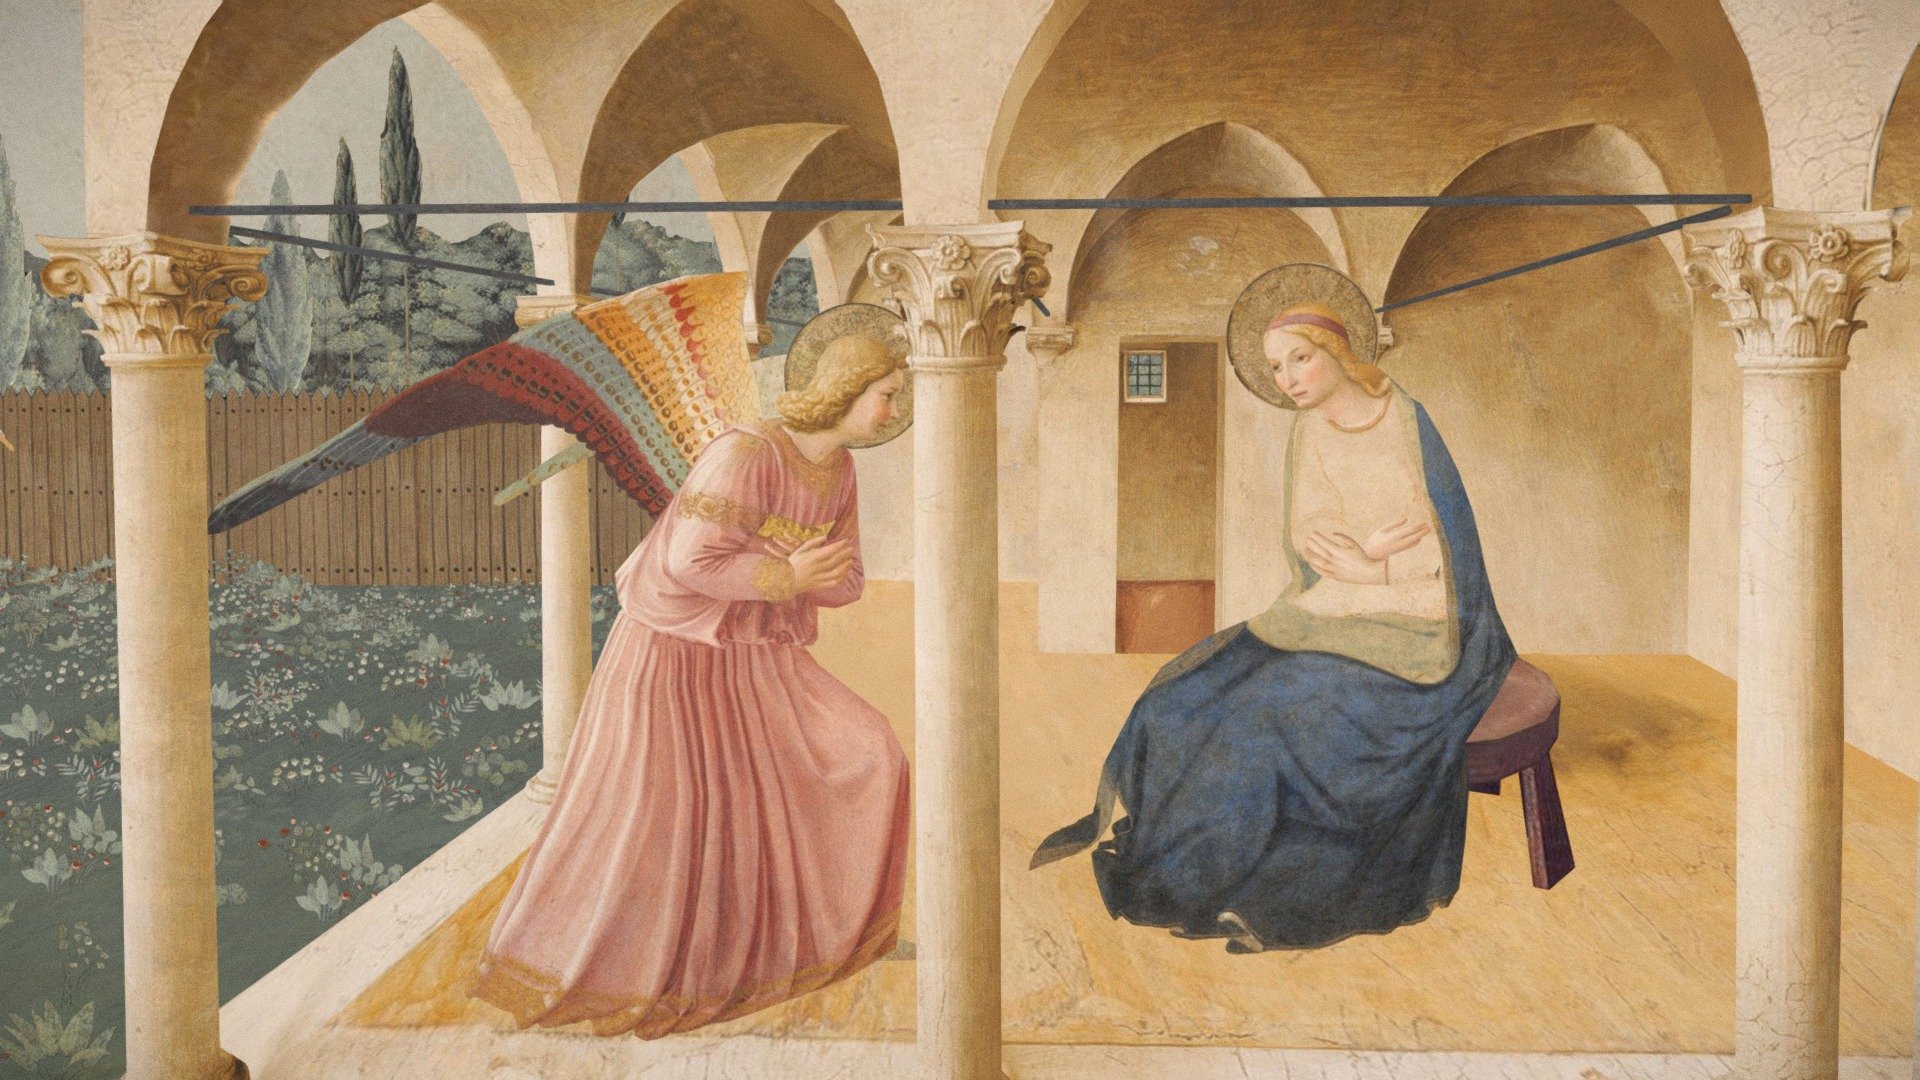 Fra Angelico, Annunciation, 1440-1445, Basilica di San Marco, Florence, Italy. Wikimedia Commons (public domain).